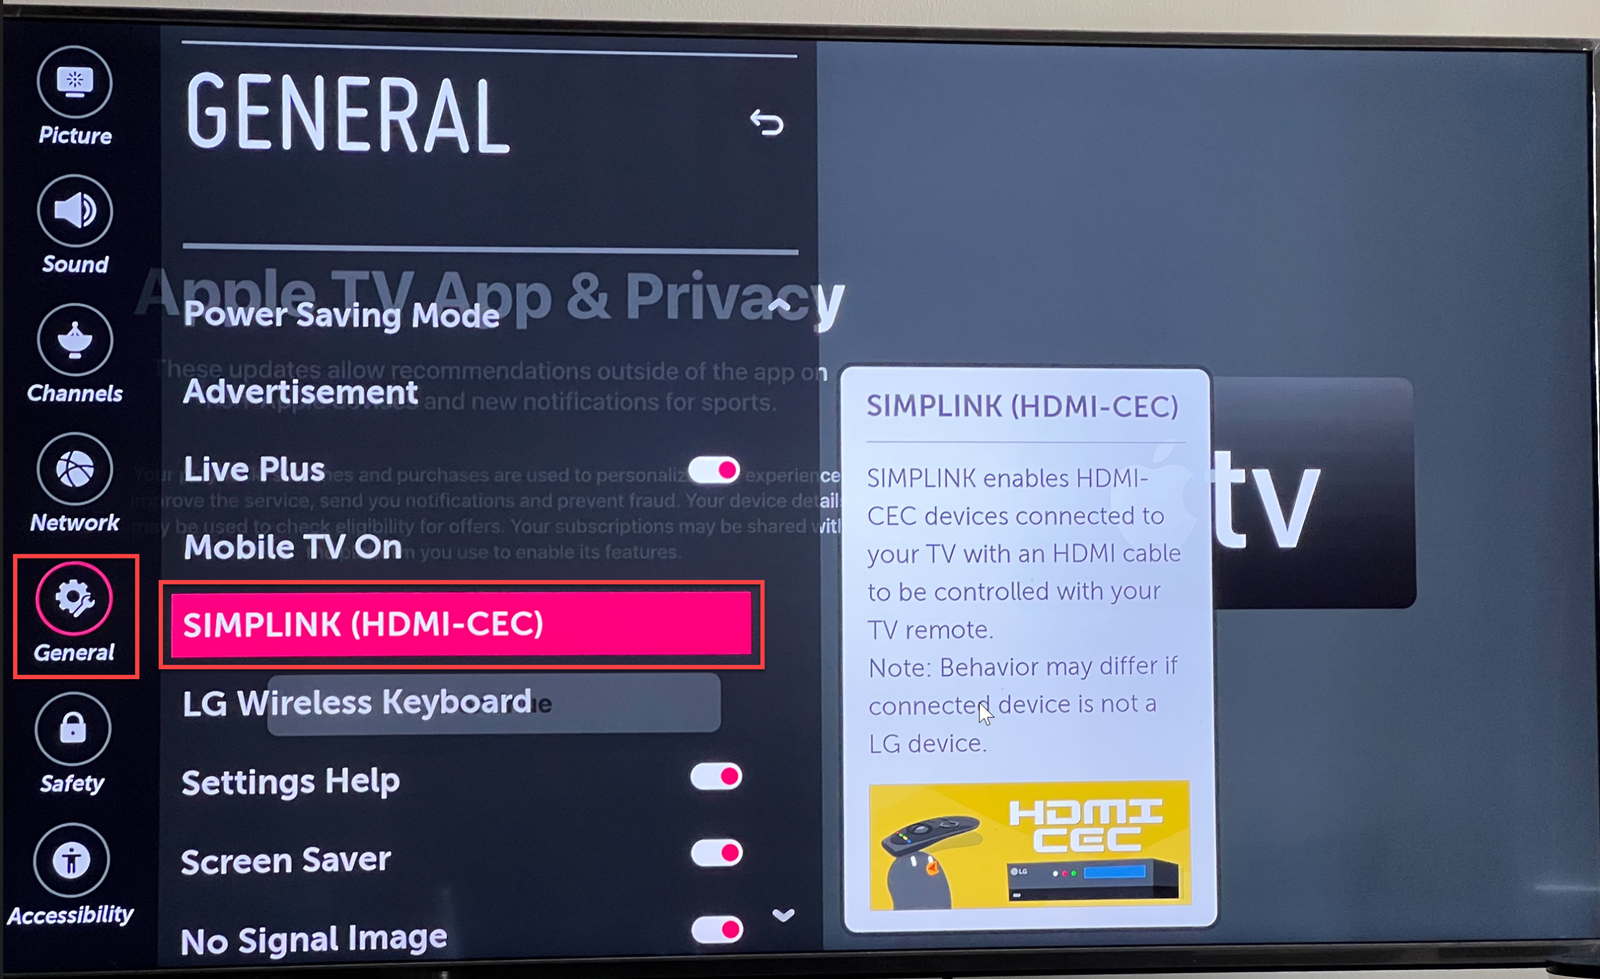 How to access SIMPLINK HDMI-CEC on LG TV